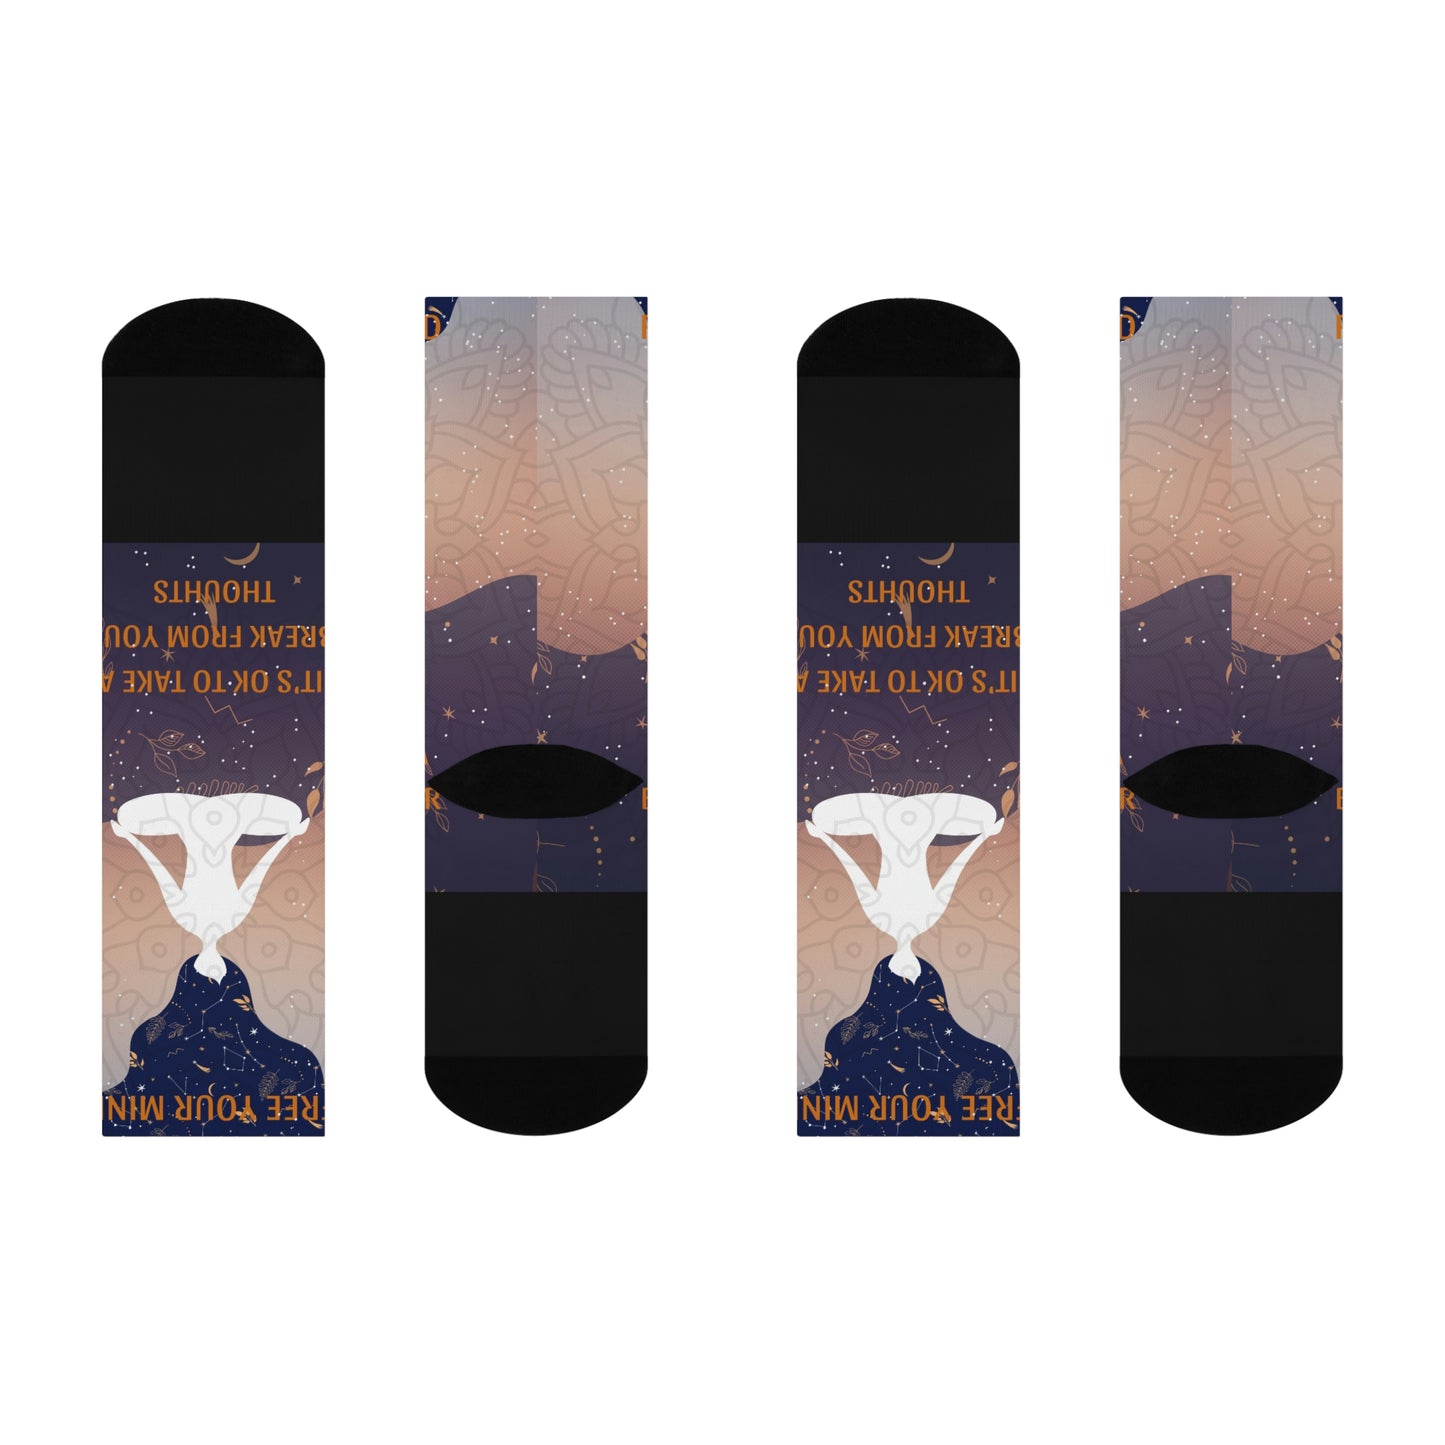 Mindfulness Crew Socks | BKLA | shoes & accessories | backpack, hat, phone cover, tote bags, clutch bags